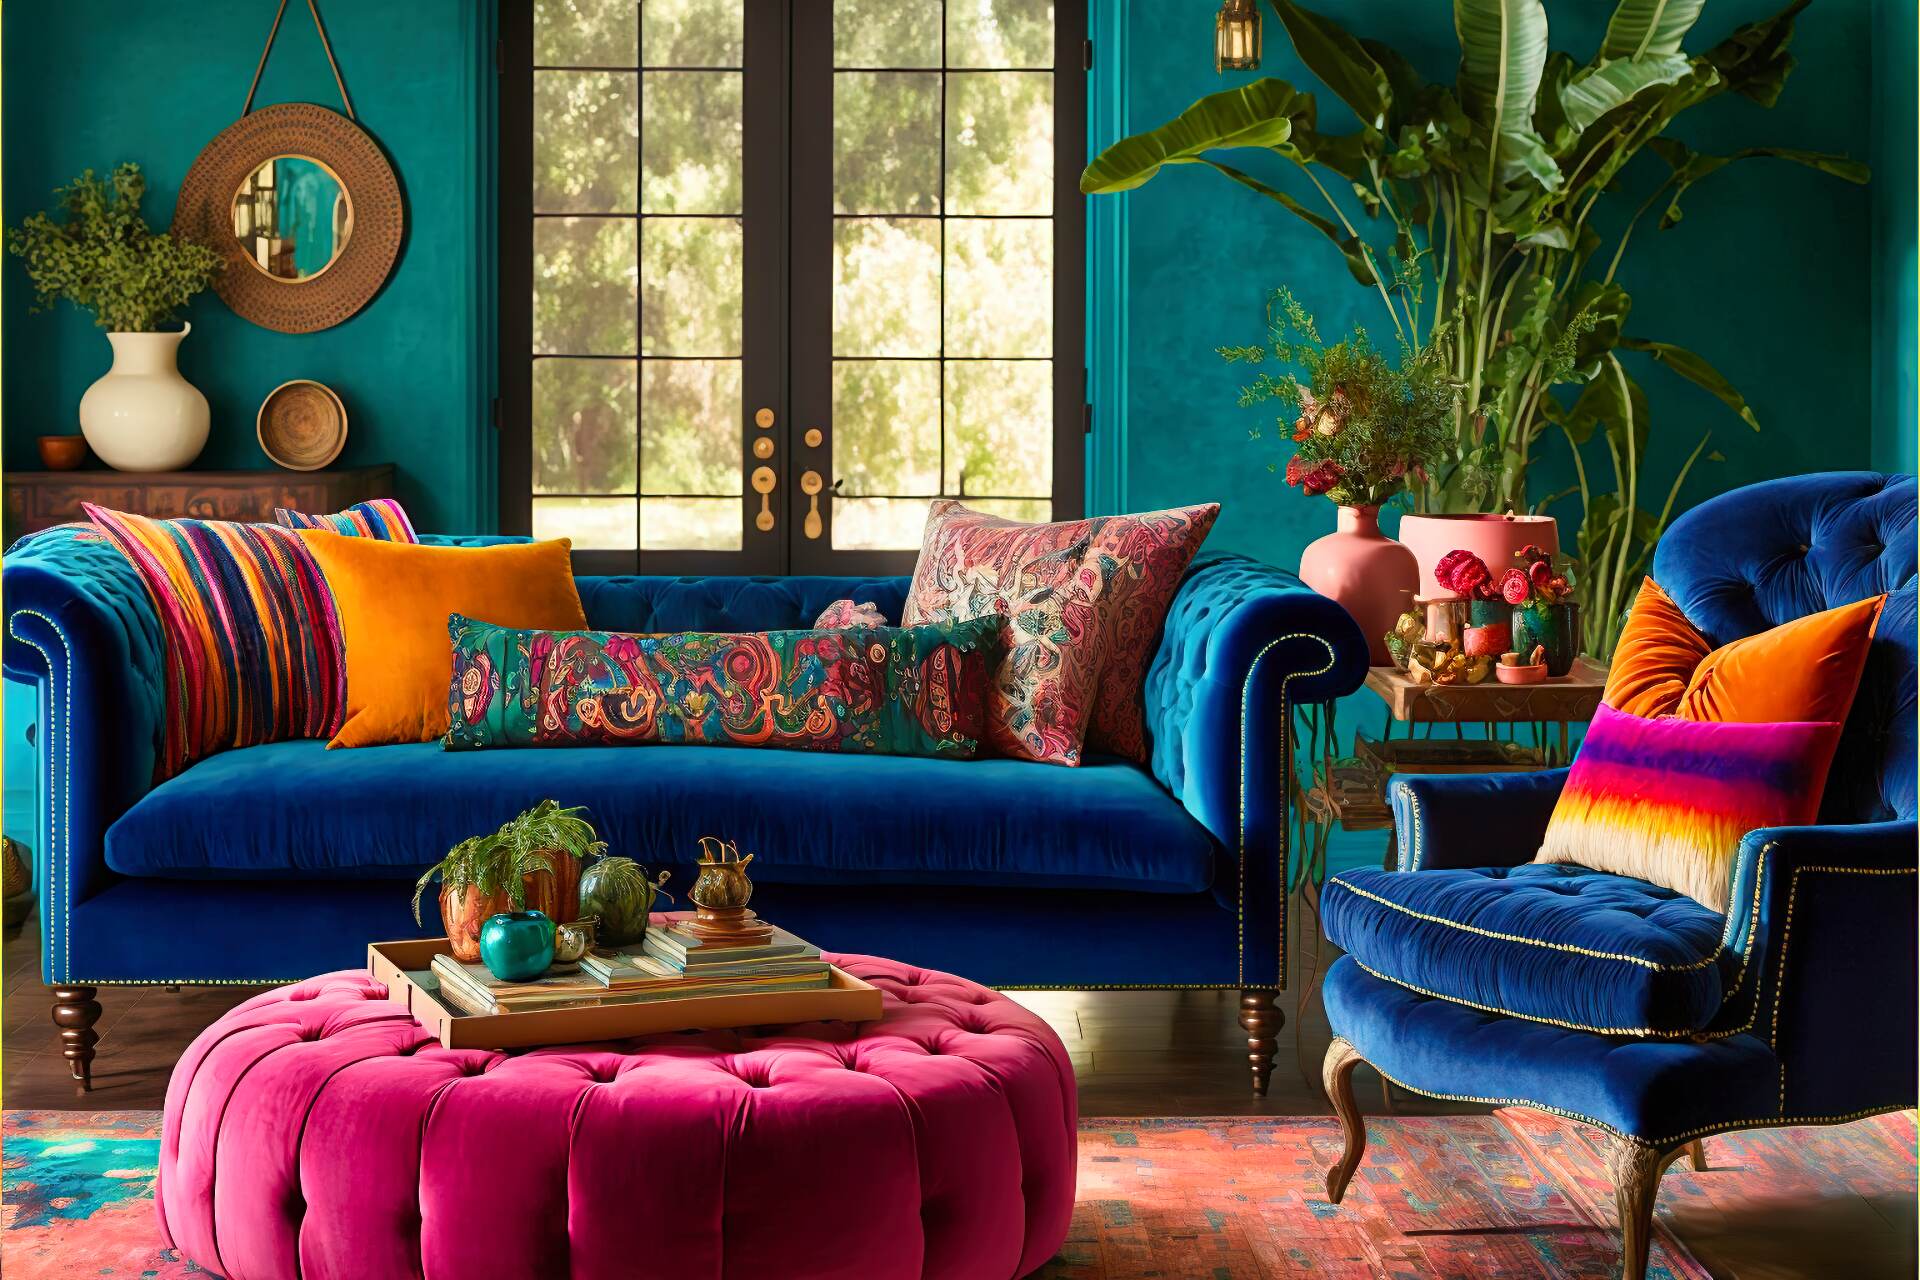 This Bohemian Living Room Features A Vibrant Color Palette, With Deep Blue And Green Hues Accented By Pops Of Bright Pink And Orange. A Plush Velvet Sofa Sits At The Center Of The Space, Surrounded By A Mix Of Patterned Throw Pillows And Woven Textiles. A Large Woven Tapestry Hangs Above The Fireplace, Adding A Touch Of Global Inspiration To The Design.